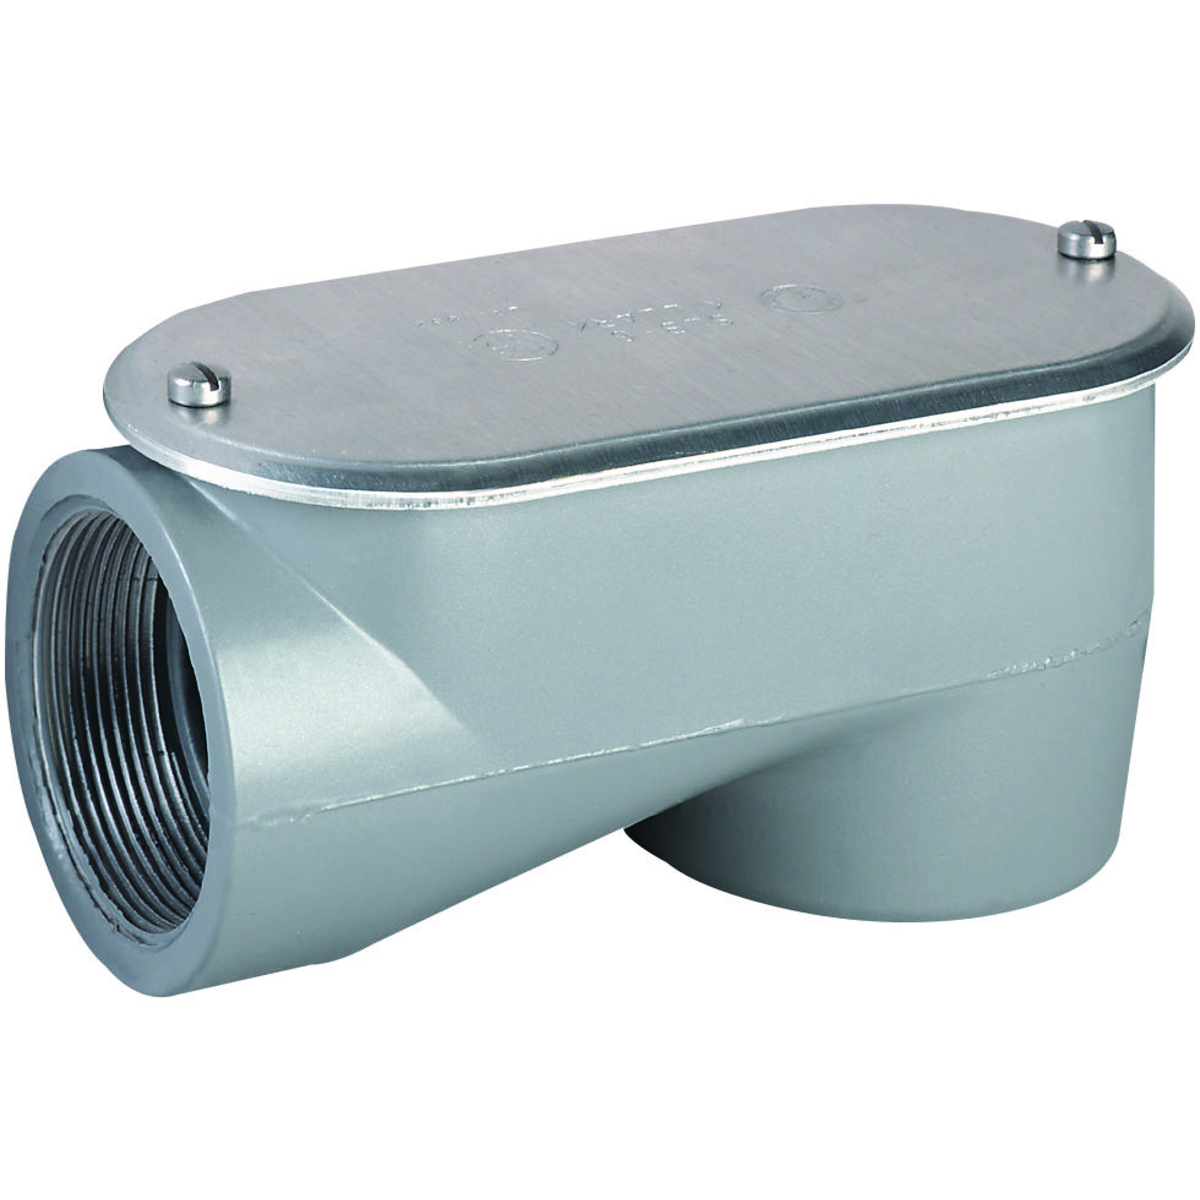 SLB SERIES - ALUMINUM SERVICE ENTRANCE BODY WITH COVER AND GASKET - HUBSIZE 1-1/2 IN